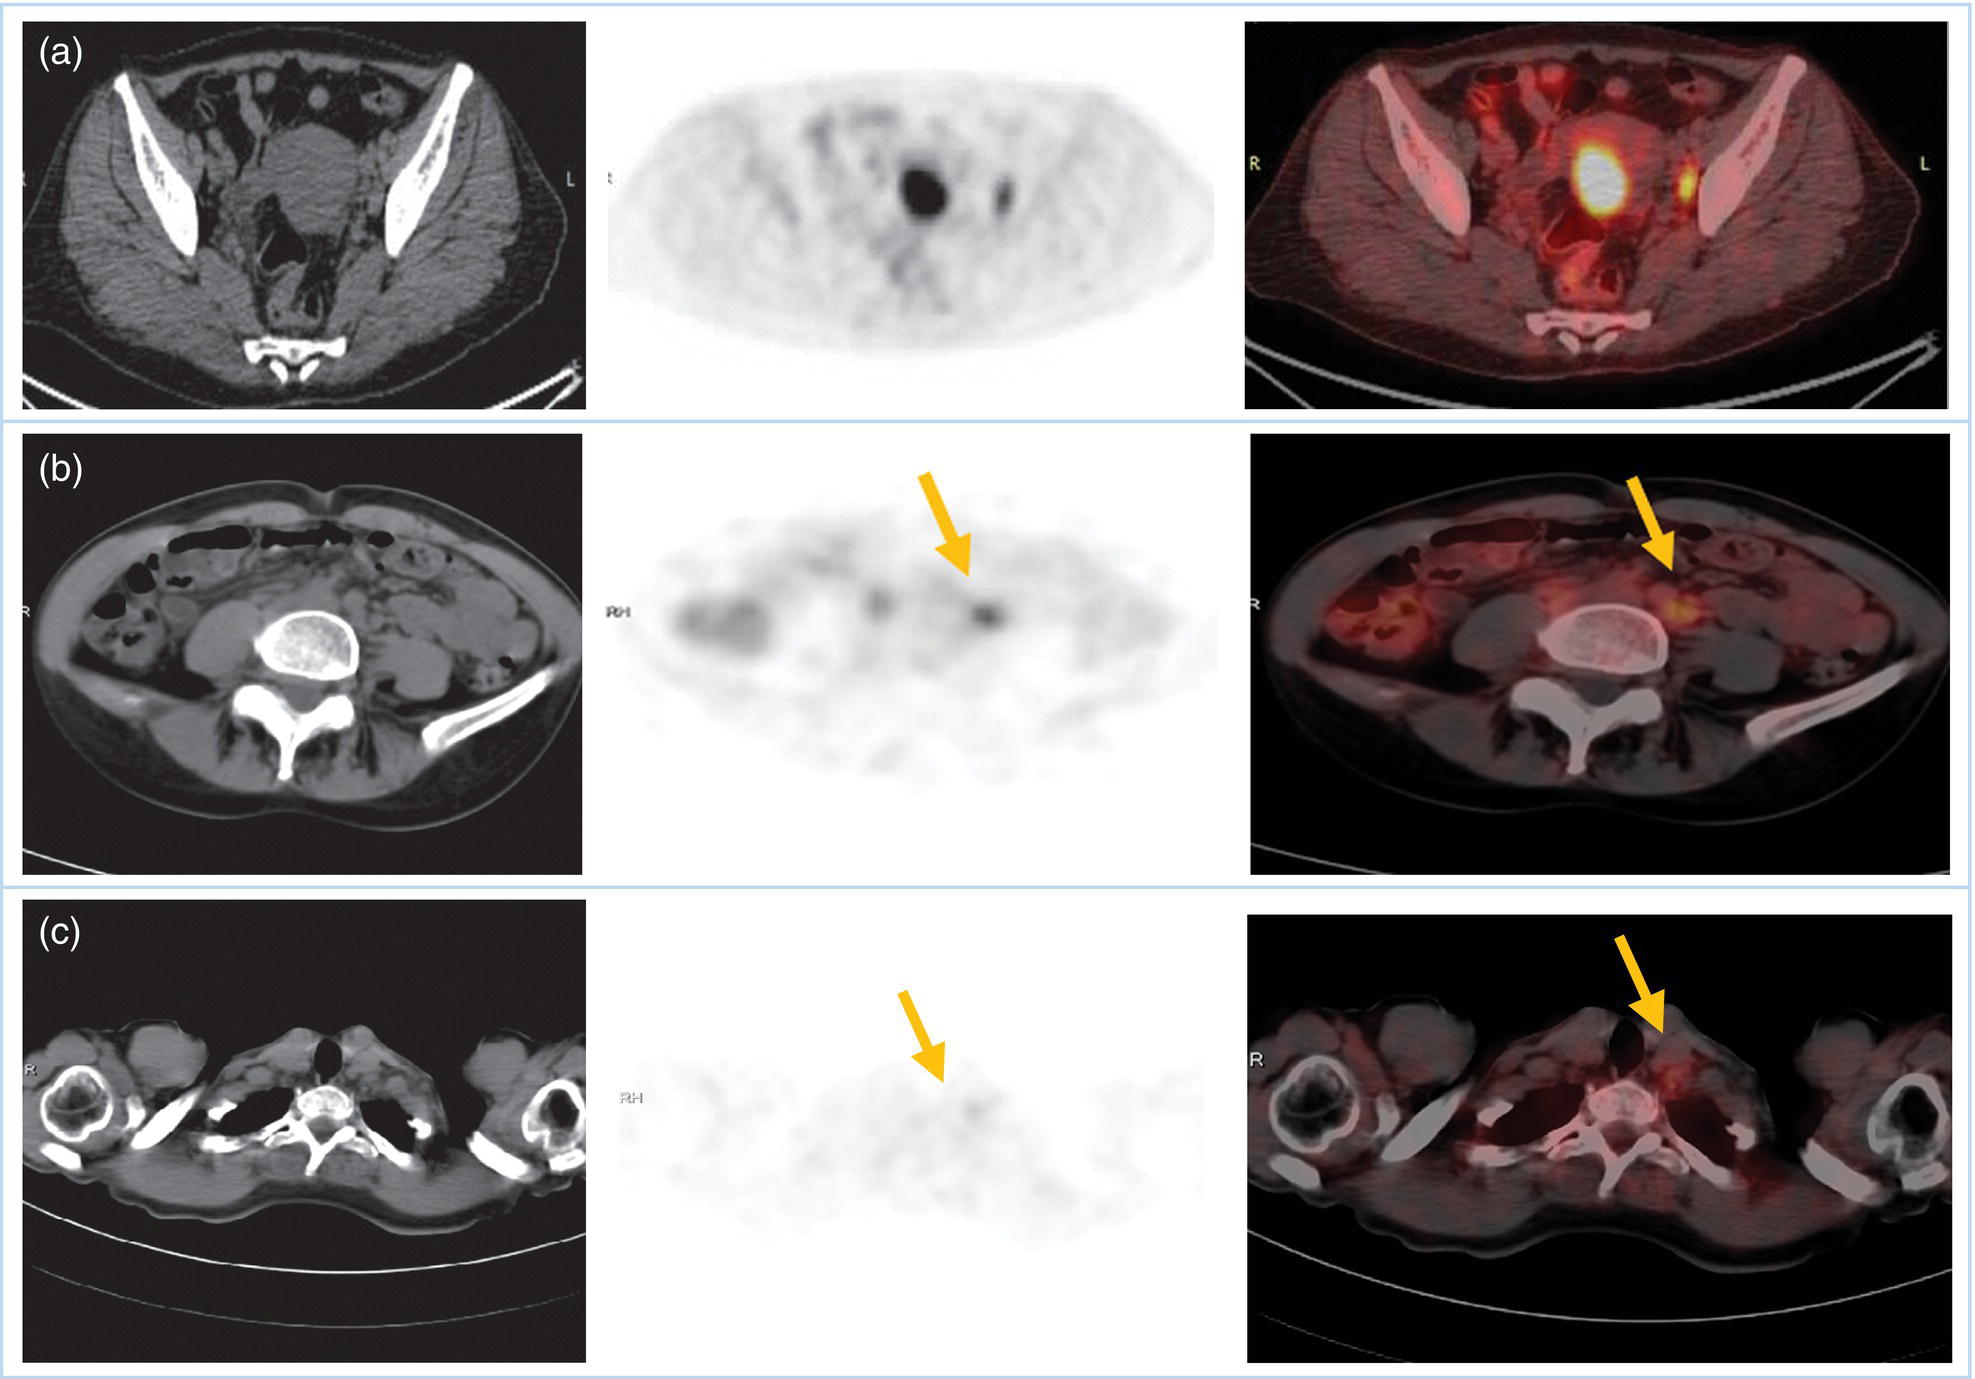 Schematic illustration of FDG PET MIP image of a 61-year-old female patient presenting with a suspected uterine mass (left). FDG PET/CT scan showed intensely hypermetabolic uterine mass lesion suggestive of primary tumor (as shown in image A below) as well as hypermetabolic borderline sized left para-iliac and retroperitoneal lymph nodes (arrows in image B) and left supraclavicular lymph node (arrows in image C), which were confirmed to be metastasis.